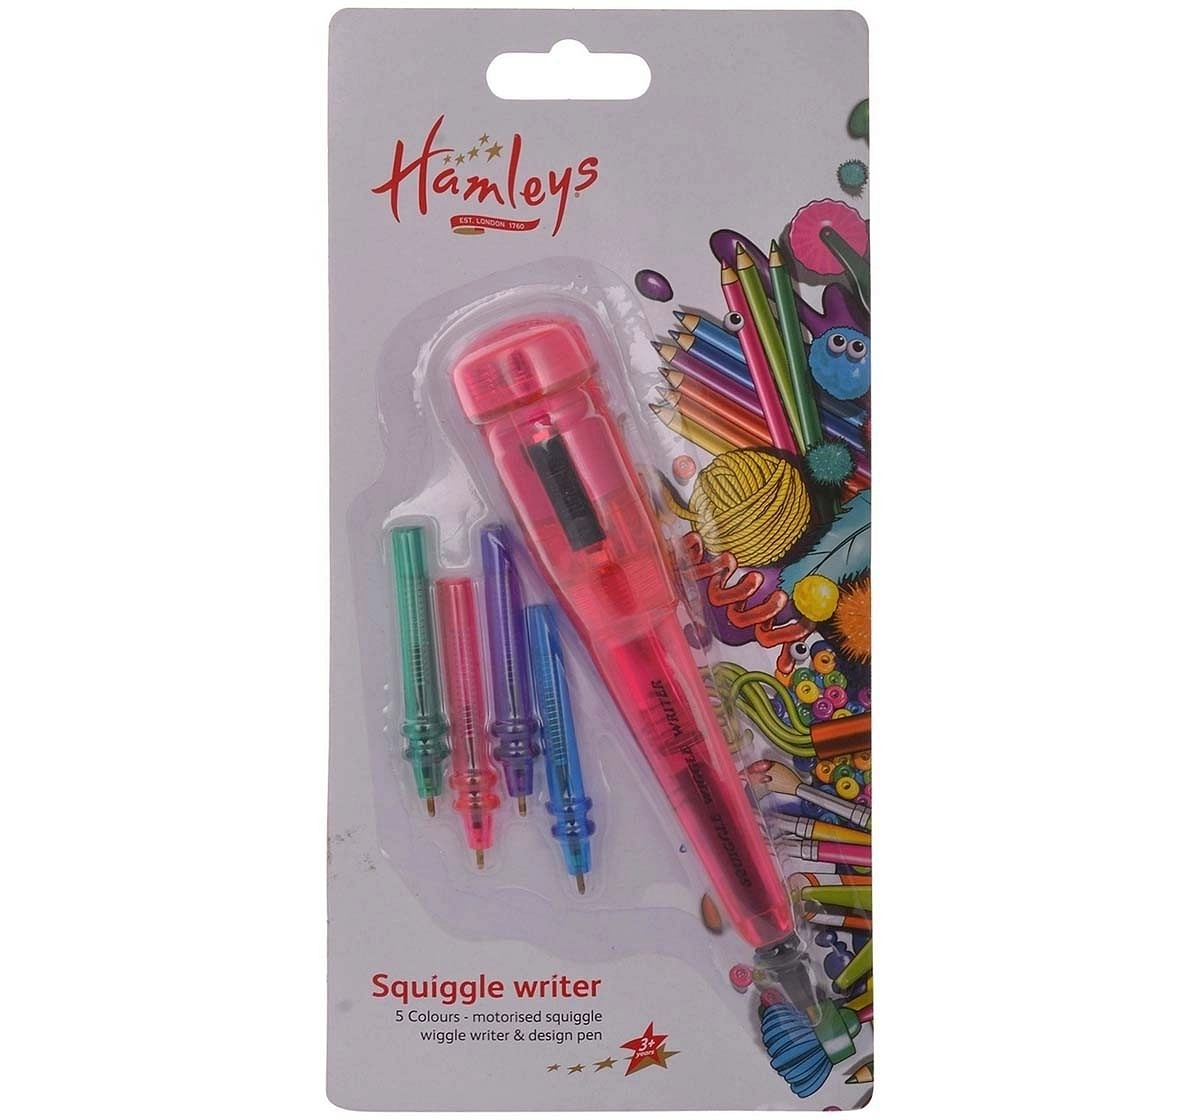 Hamleys Squiggle Wiggle Pen School Stationary for Kids age 3Y+ 